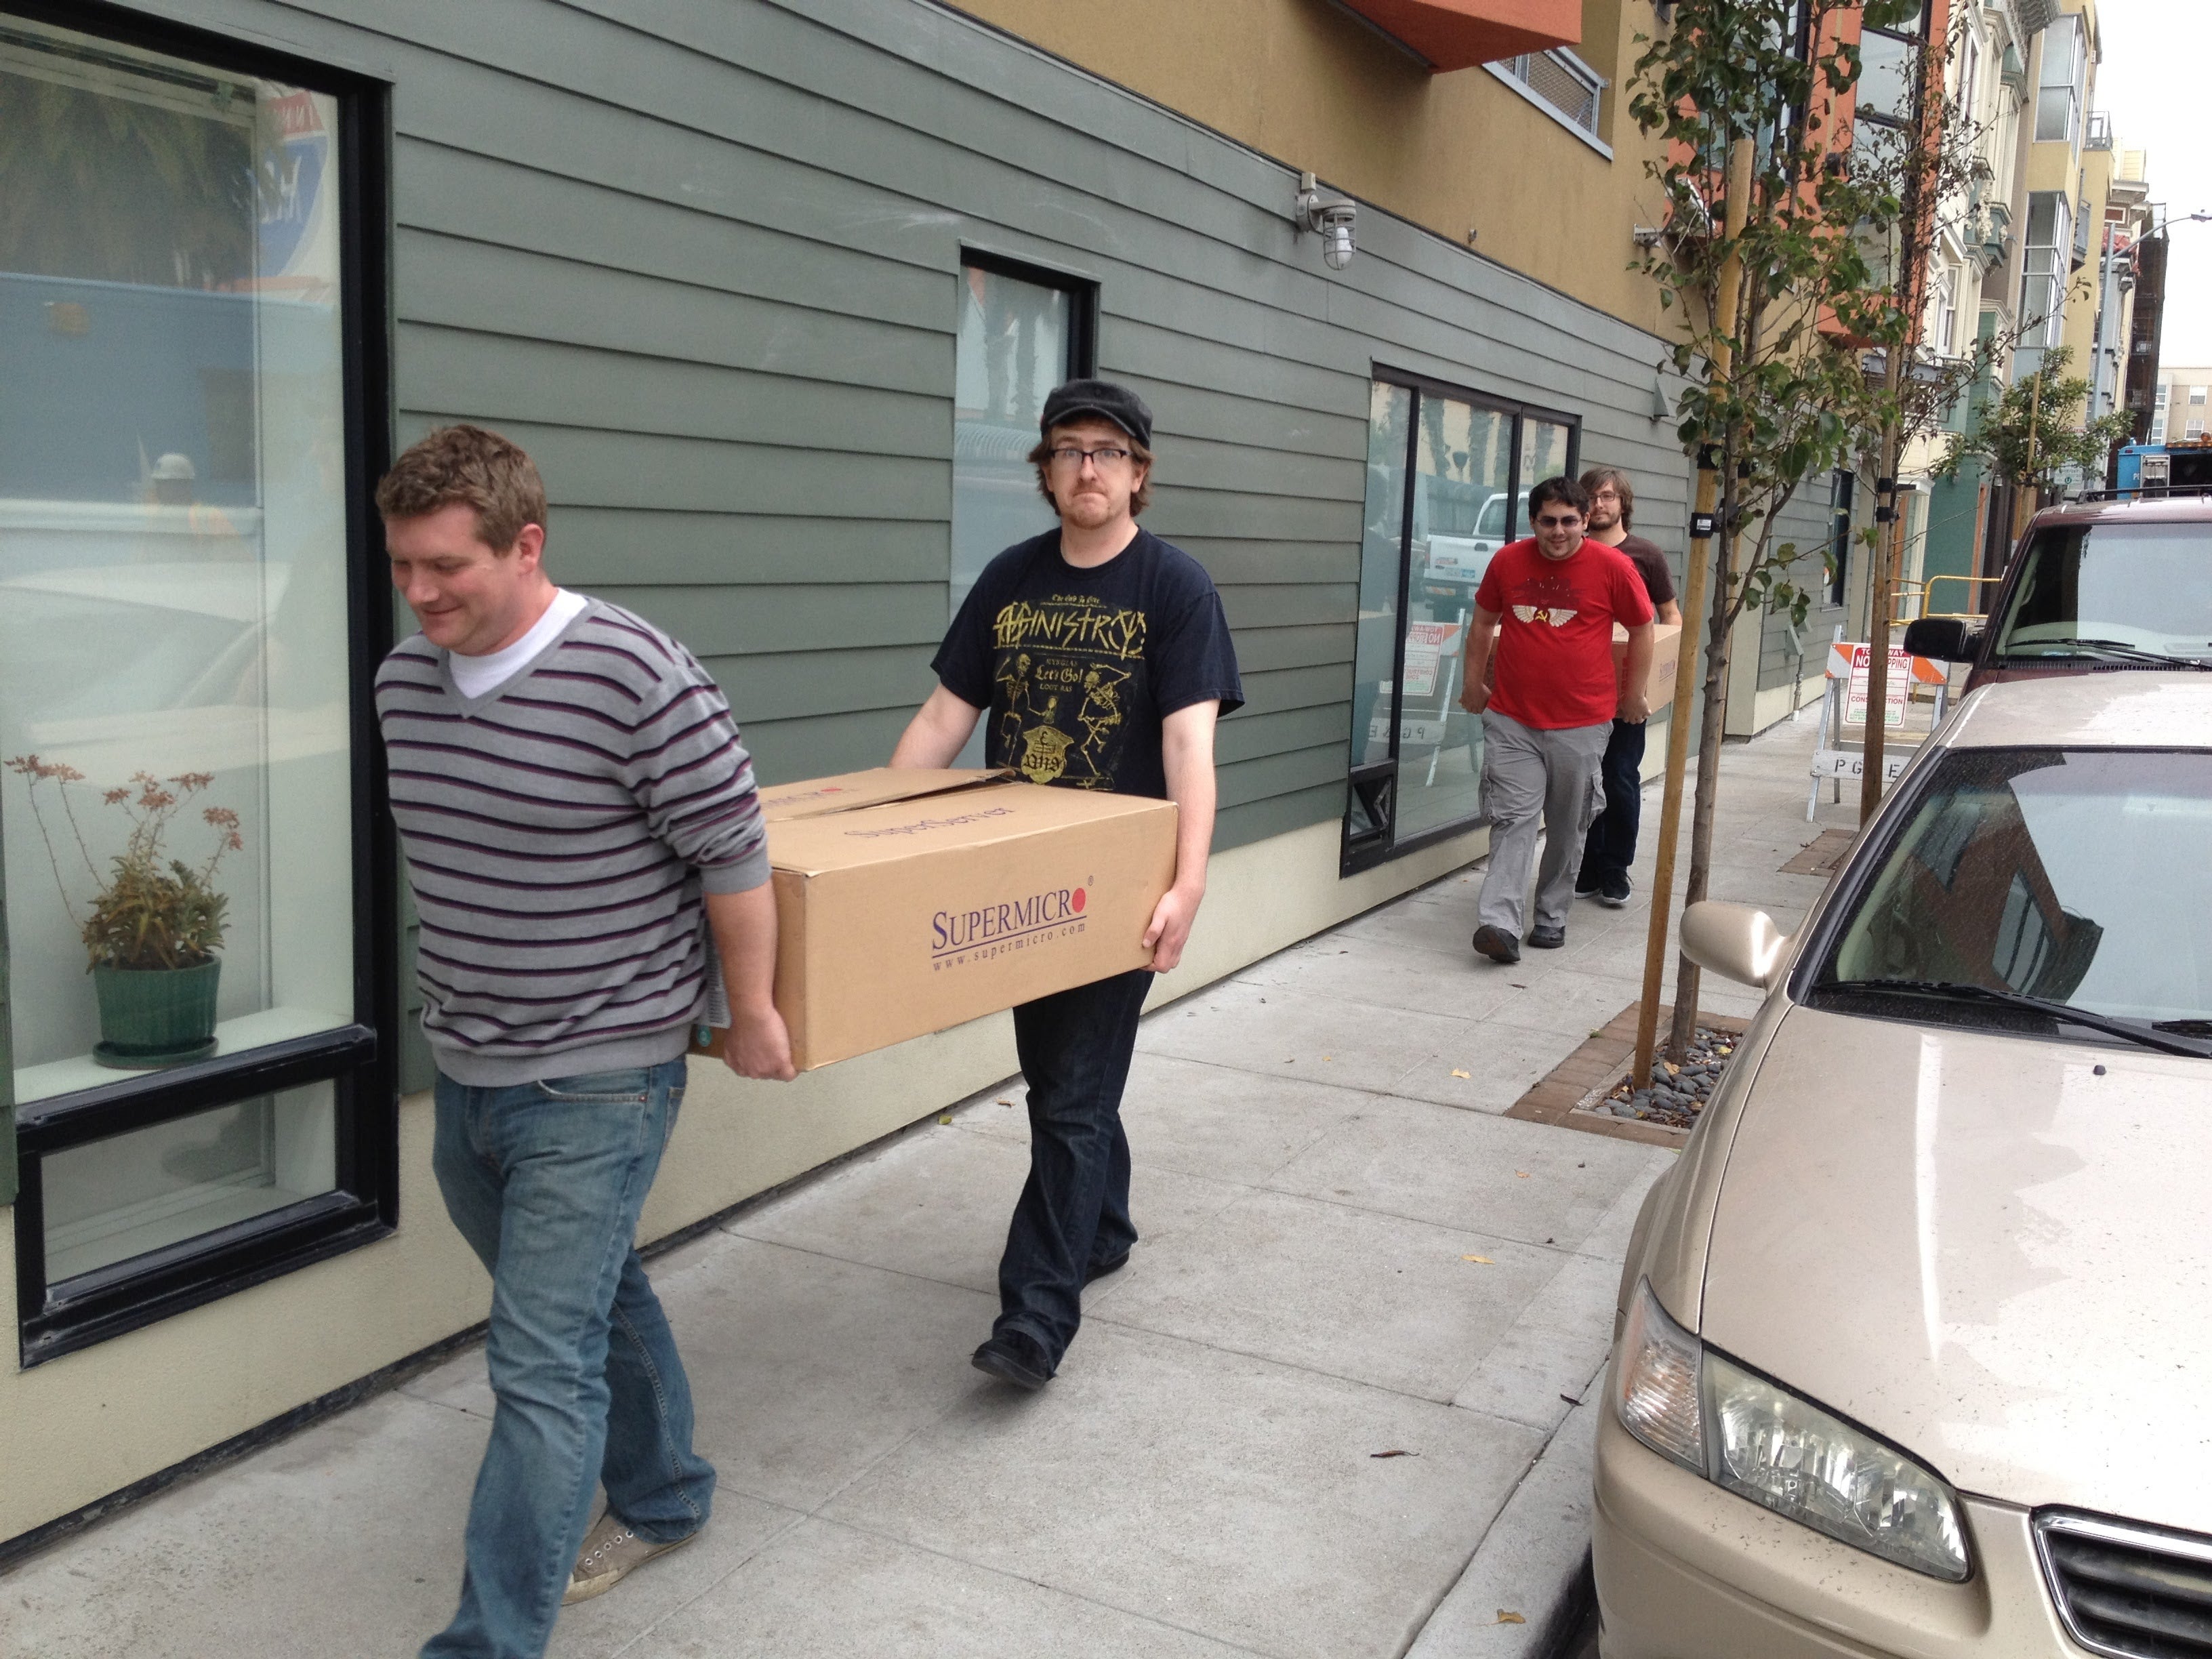 Simon Wistow and Patrick McManus carry a box across the street to Fastly’s new office